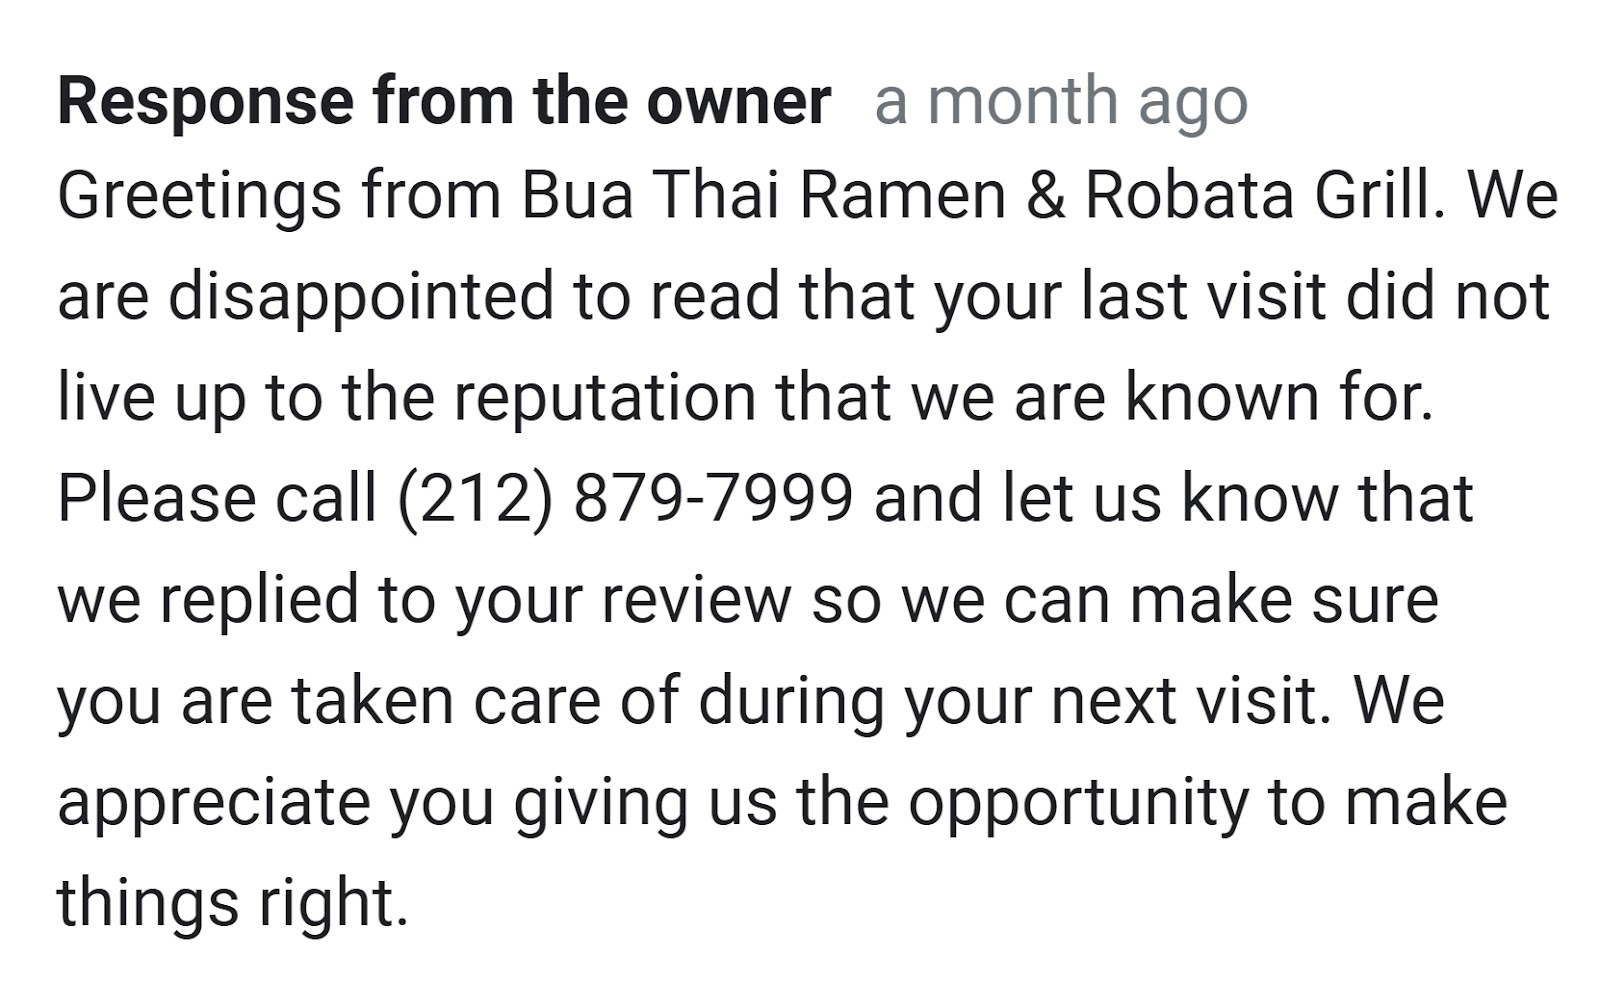 A restaurant owner's reply to a negative review